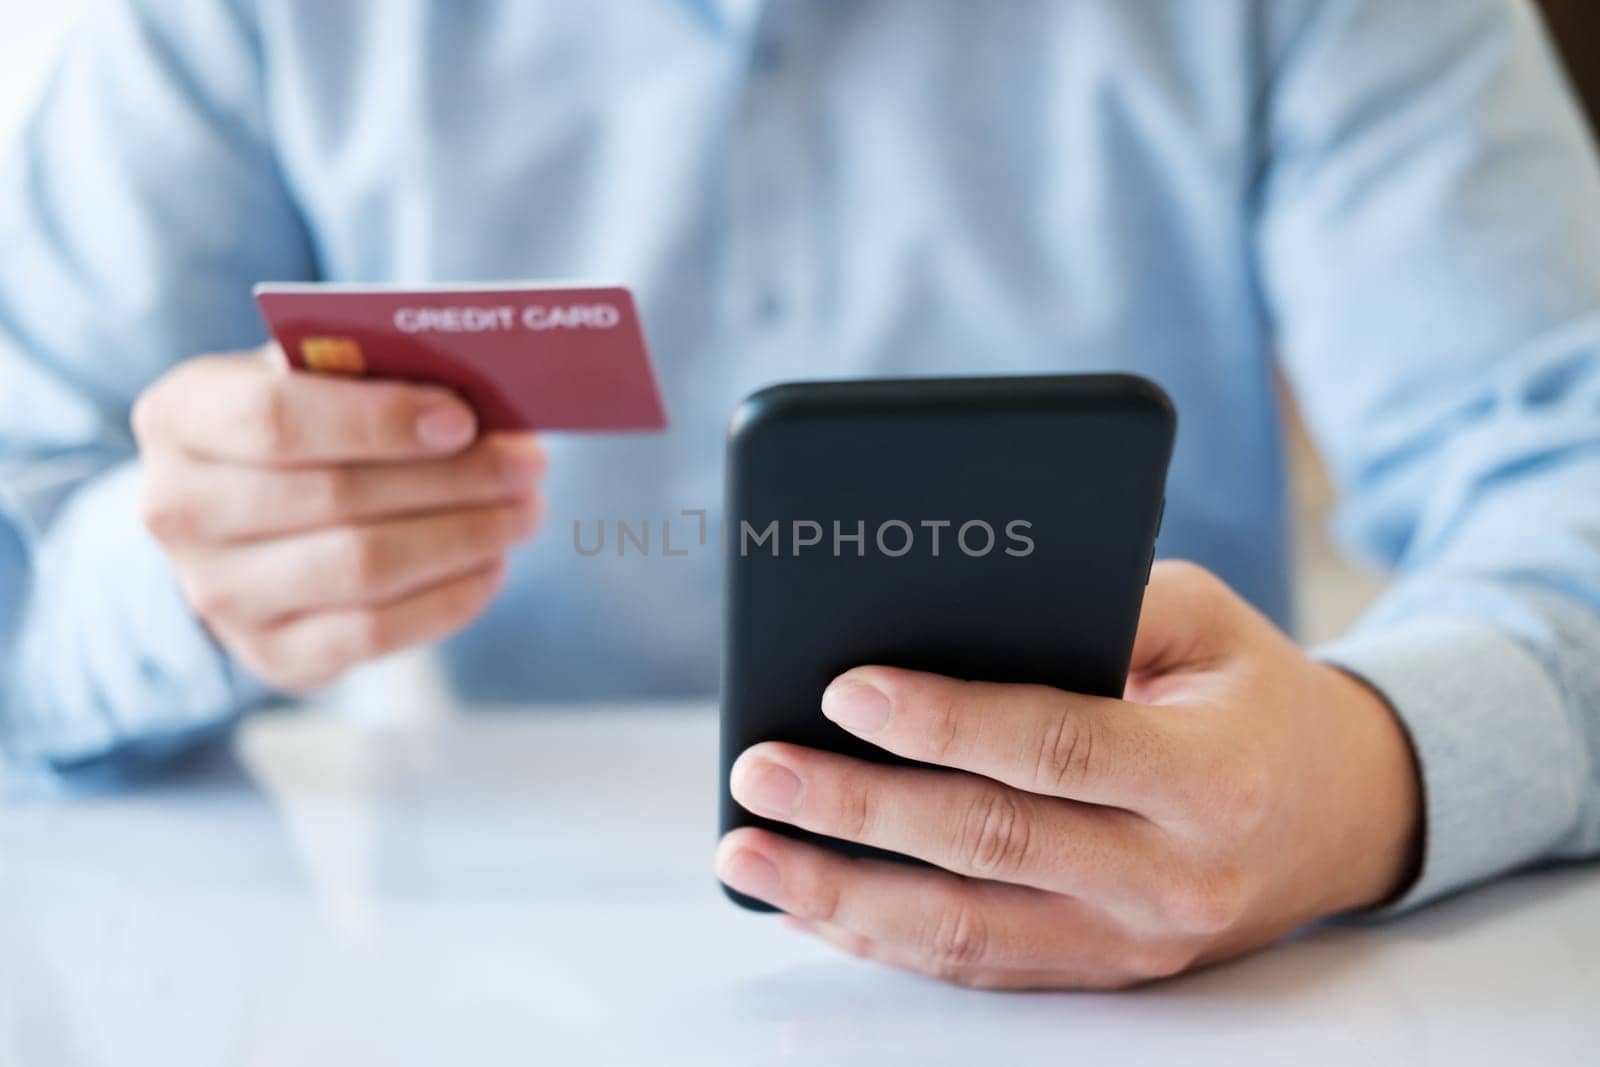 A man is using his phone to pay for a credit card. He is holding the credit card in one hand and the phone in the other